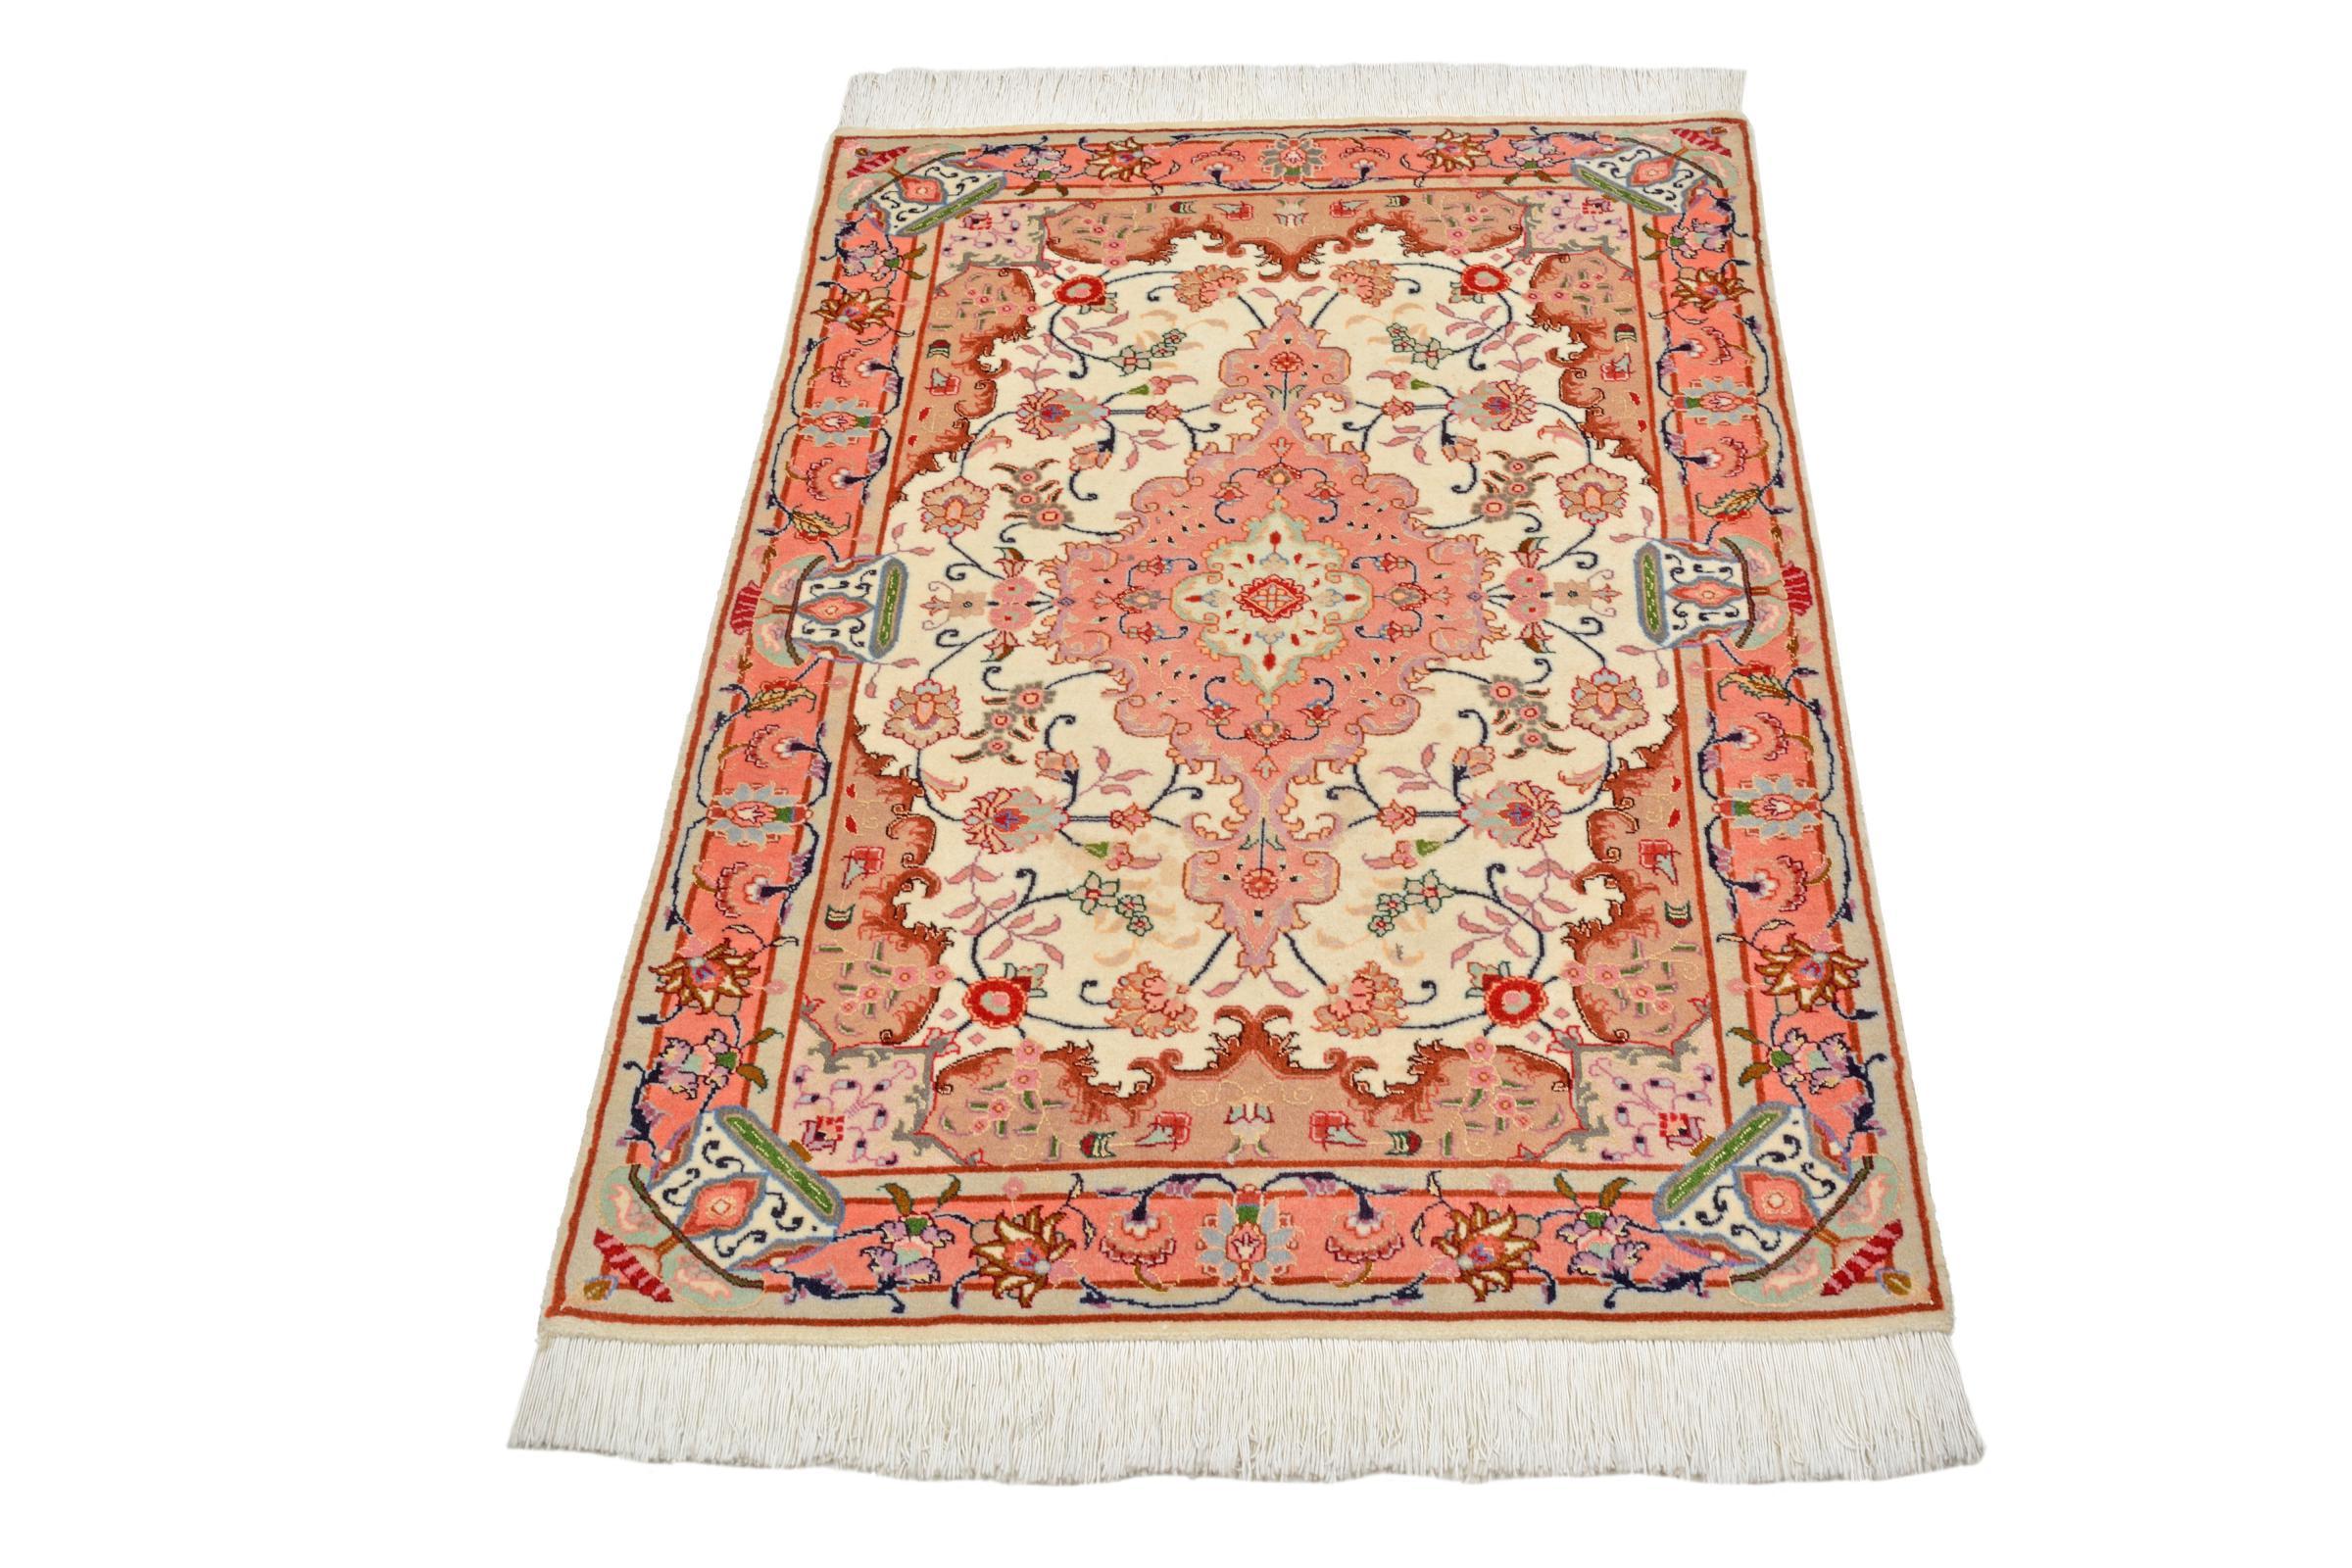 A stunning Persian Rug, Tabriz, 20th Century. 

This rug has been crafted in oldest craftmanship to a piece of sophisticated quality. 50Raj rugs possess a fine level of knot density. This Tabriz has been crafted from soft sheep wool in combination